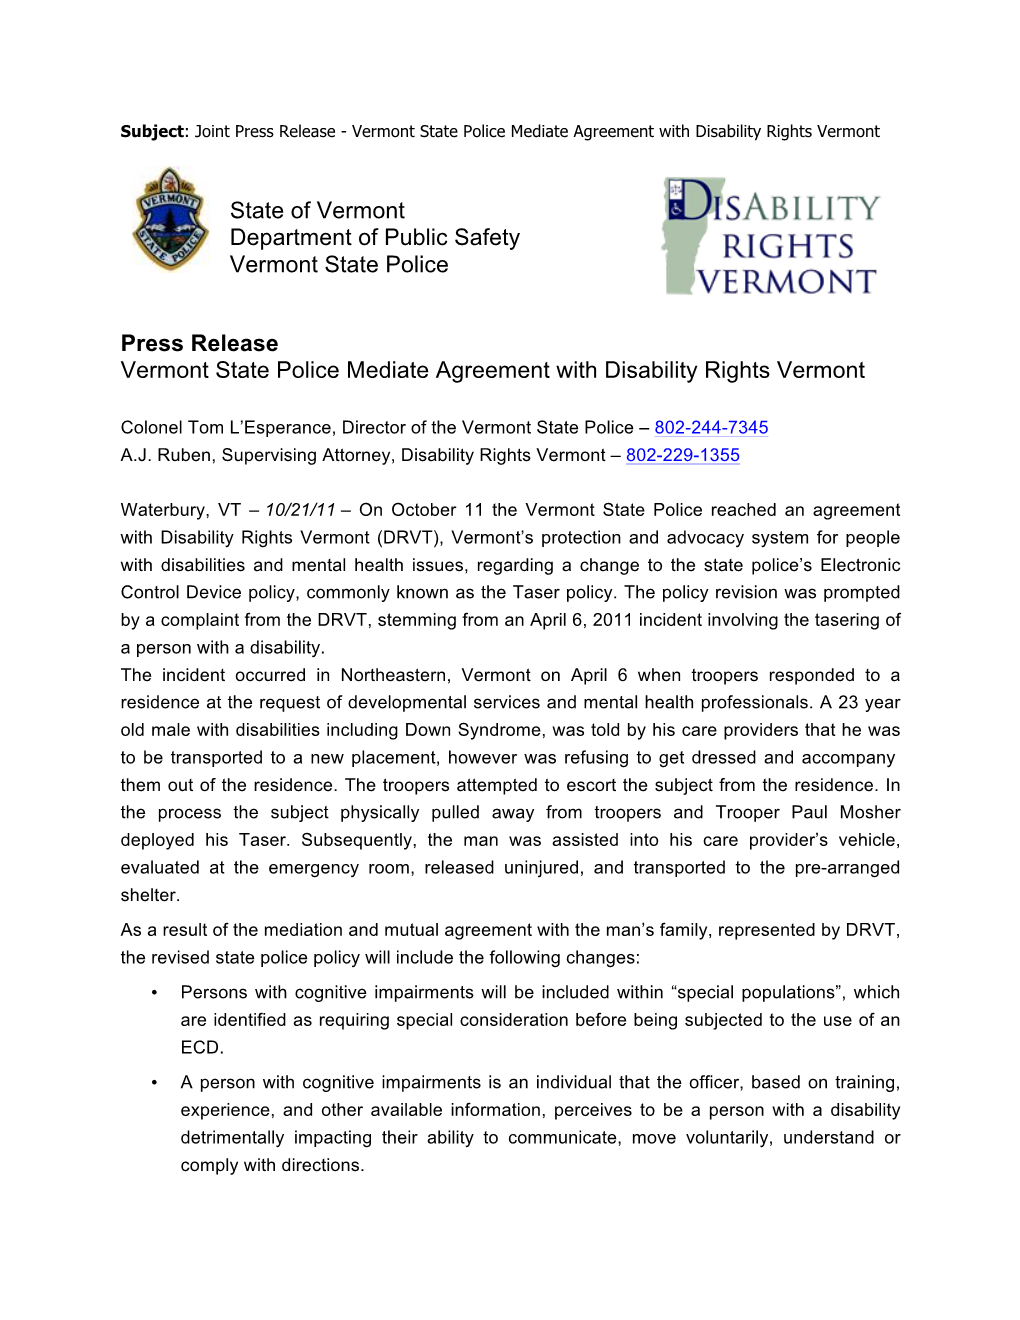 Vermont State Police Mediate Agreement with Disability Rights Vermont